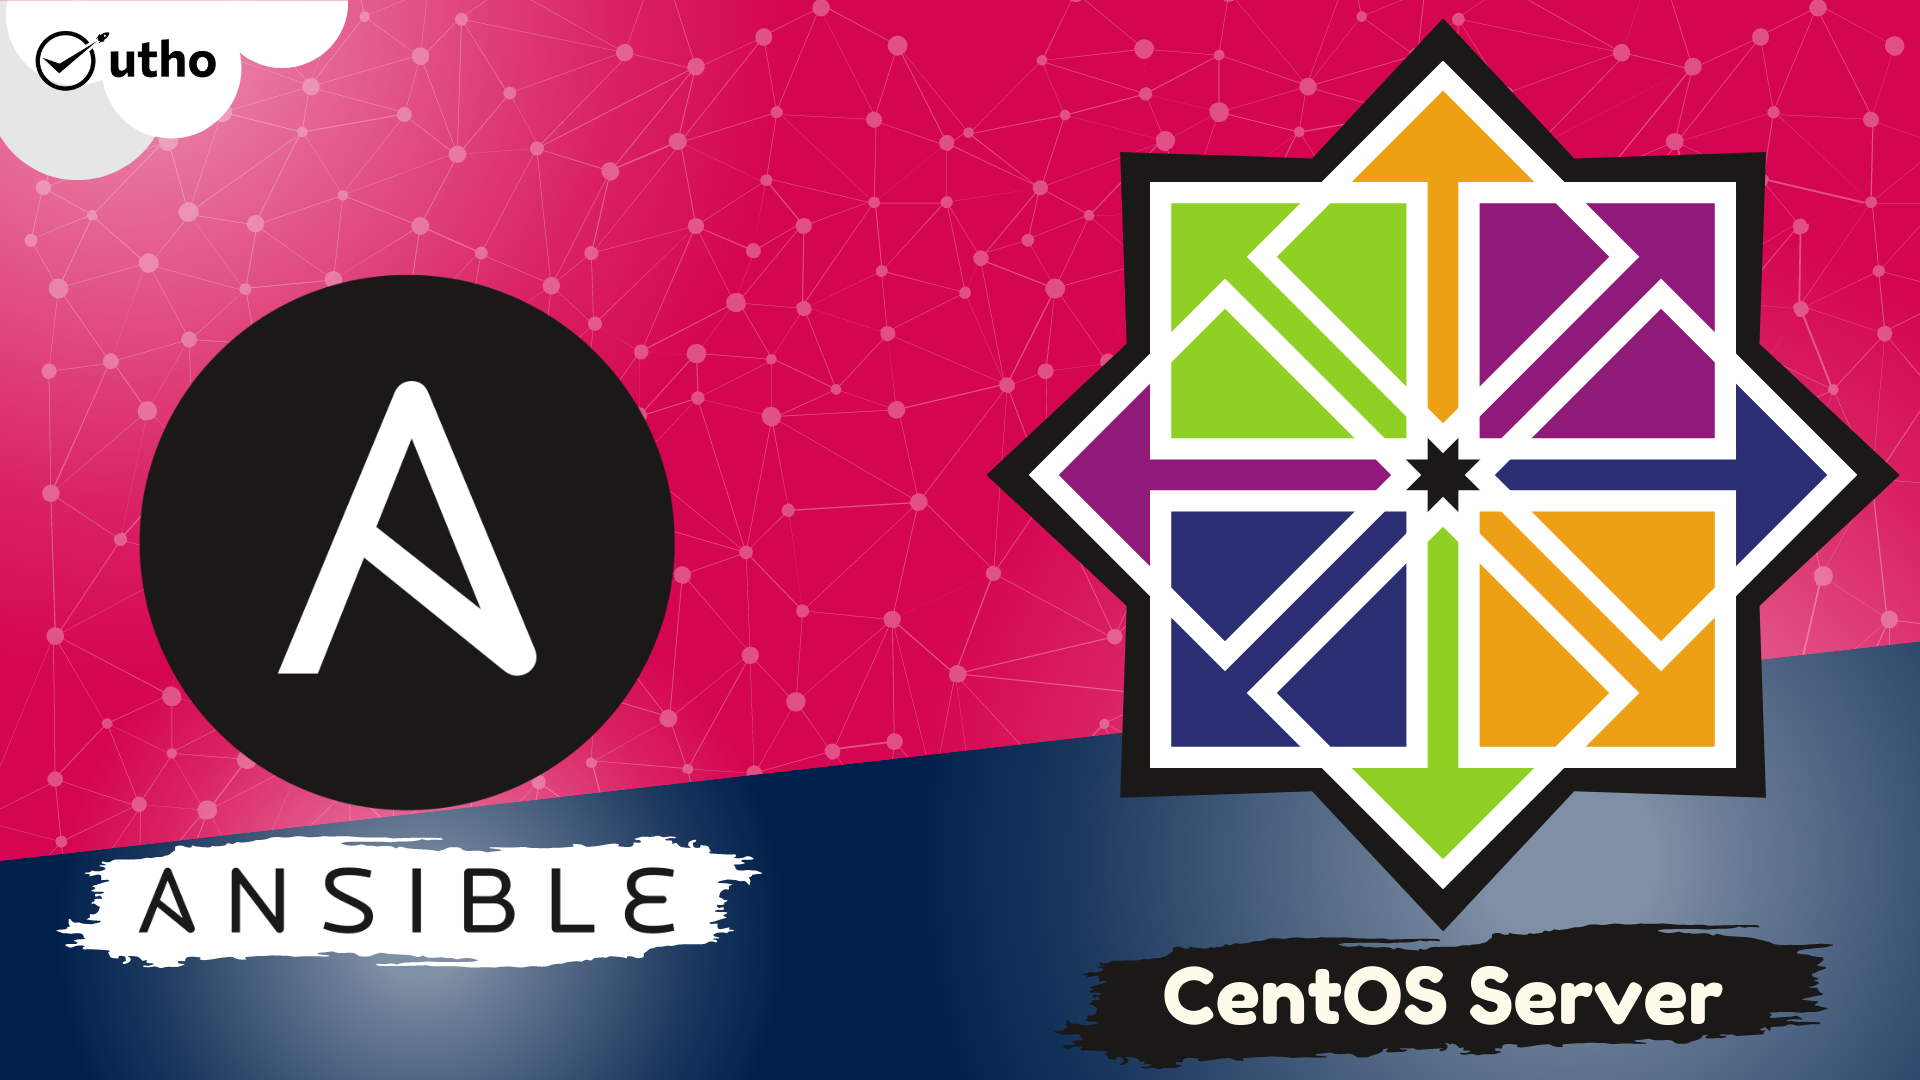 How to install Ansible on CentOS